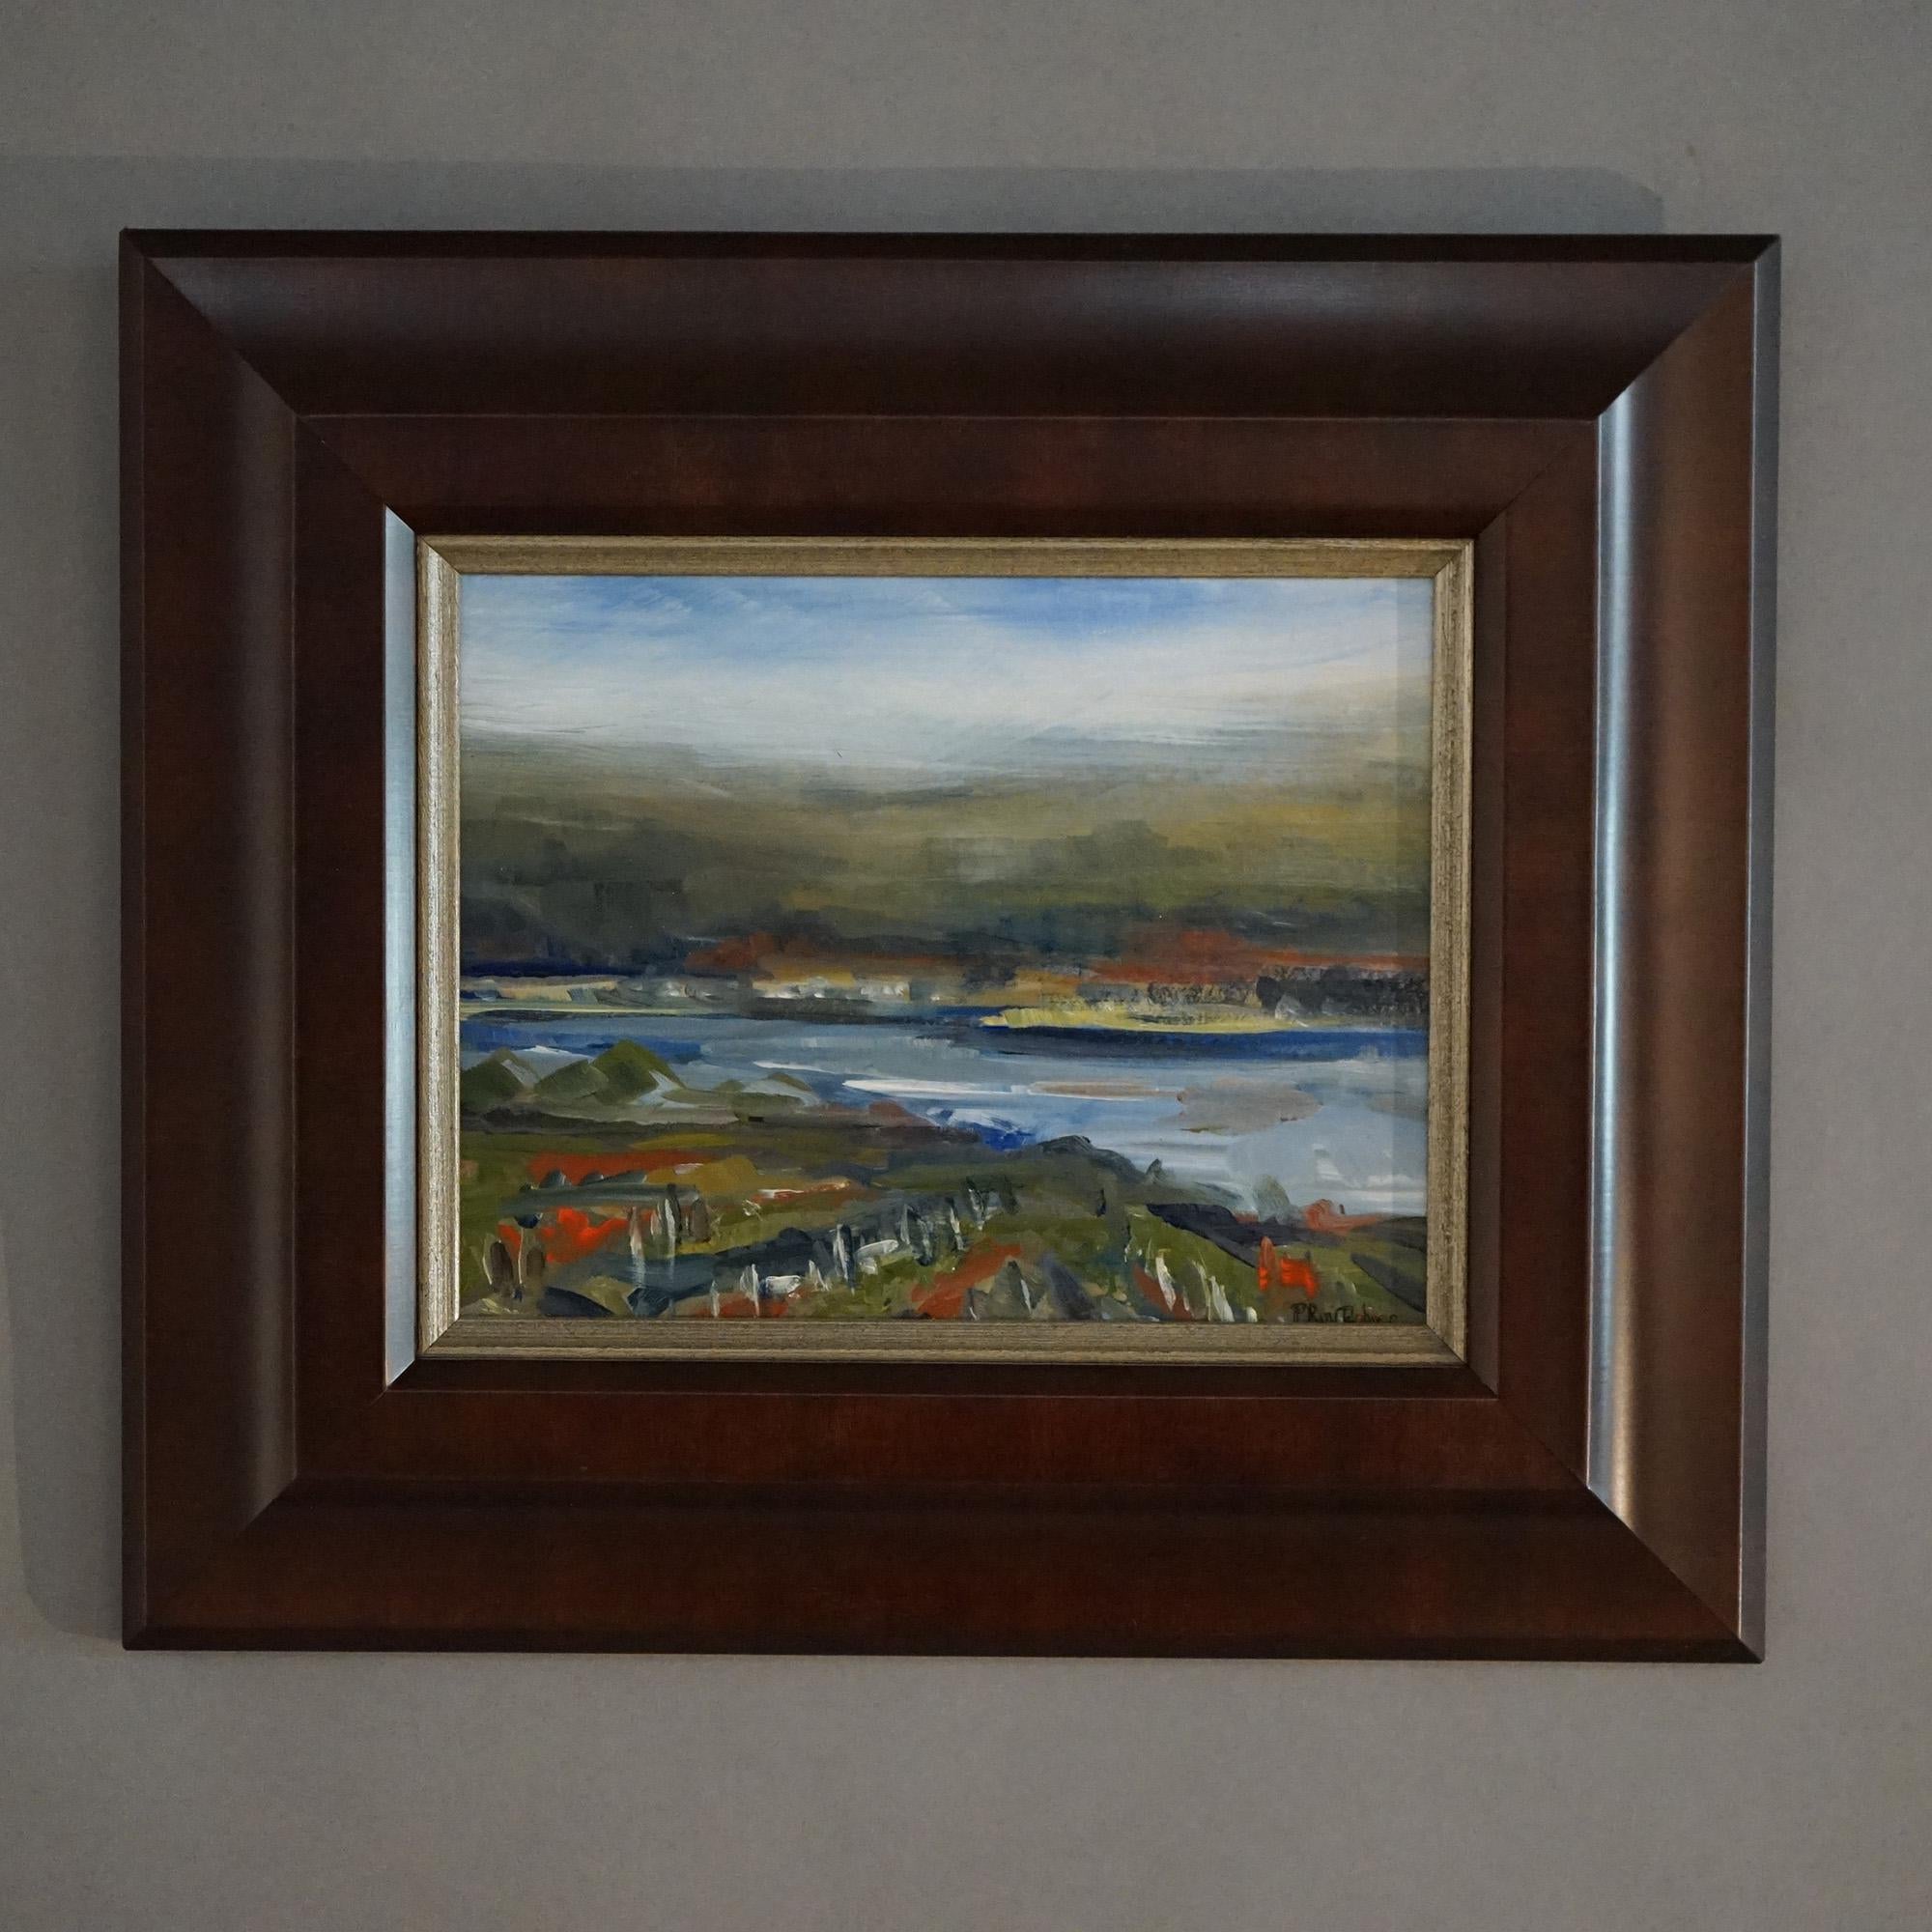 Hand-Painted Impressionistic Painting Landscape Of Finger Lakes & Vineyard by PR Rohrer 20thC